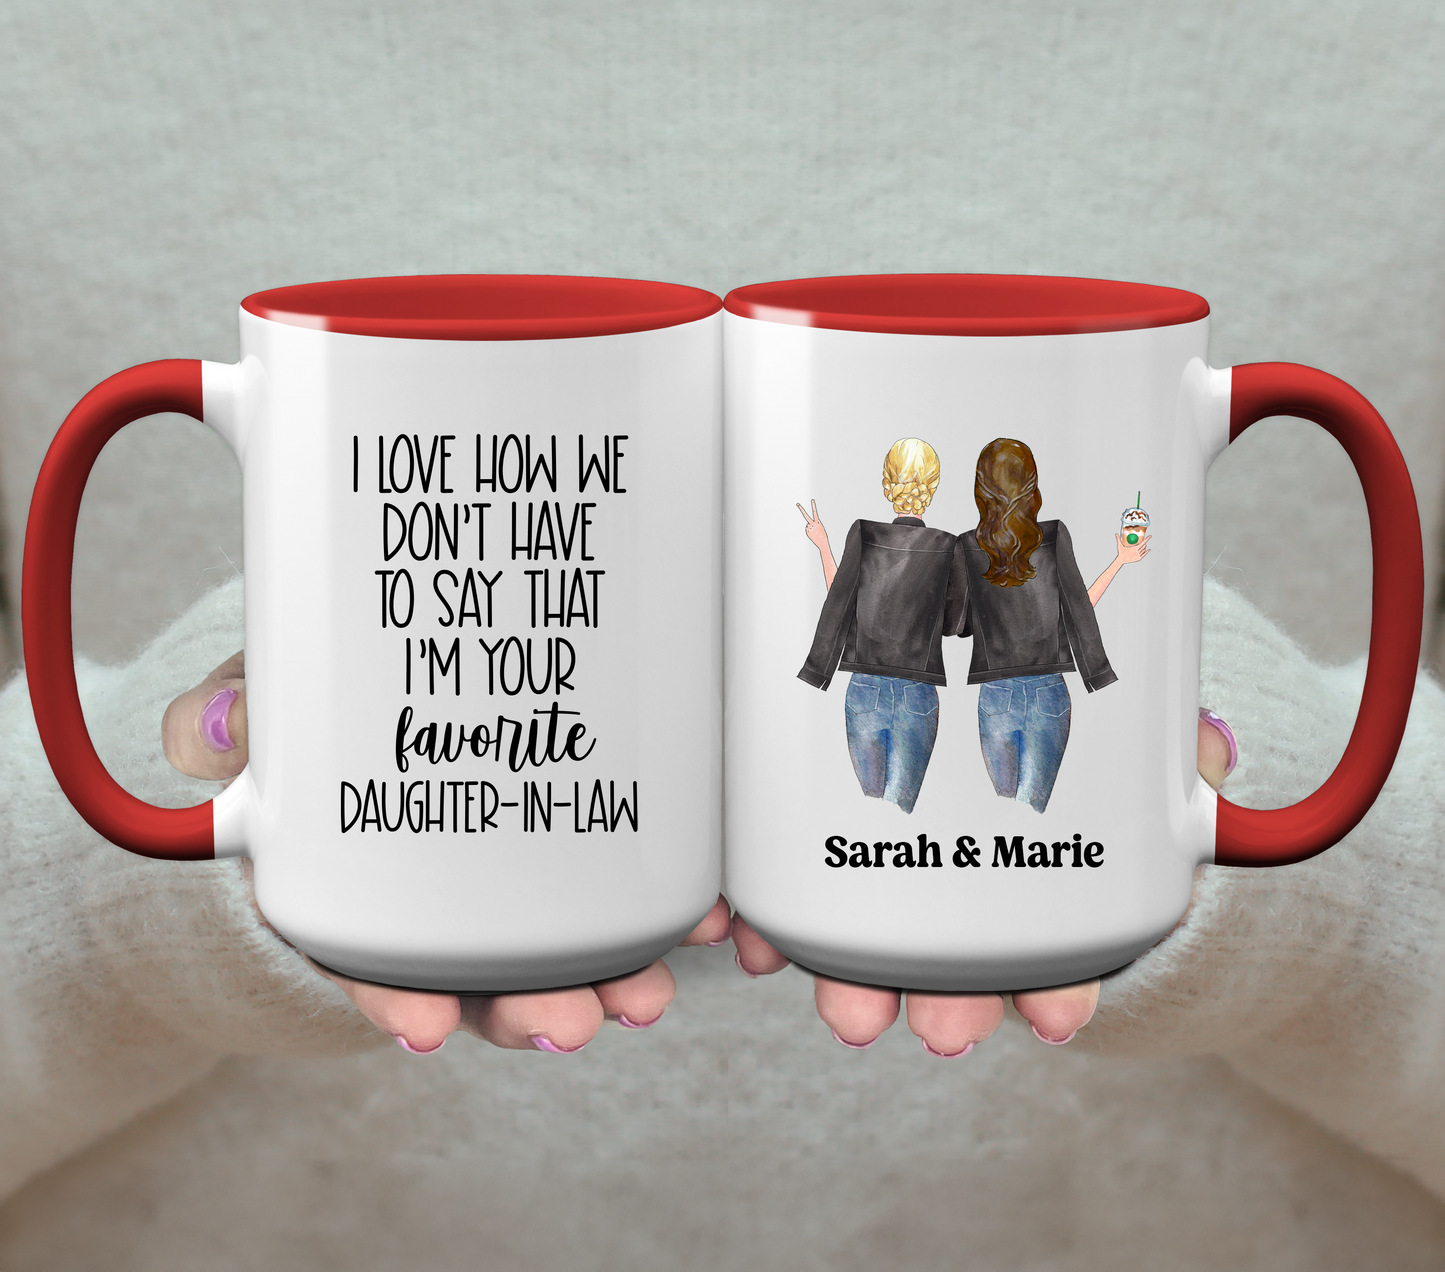 I Love How We Don't Have To Say That I'm Your Favorite Daughter-In-Law - Personalized Coffee Mug (Copy)